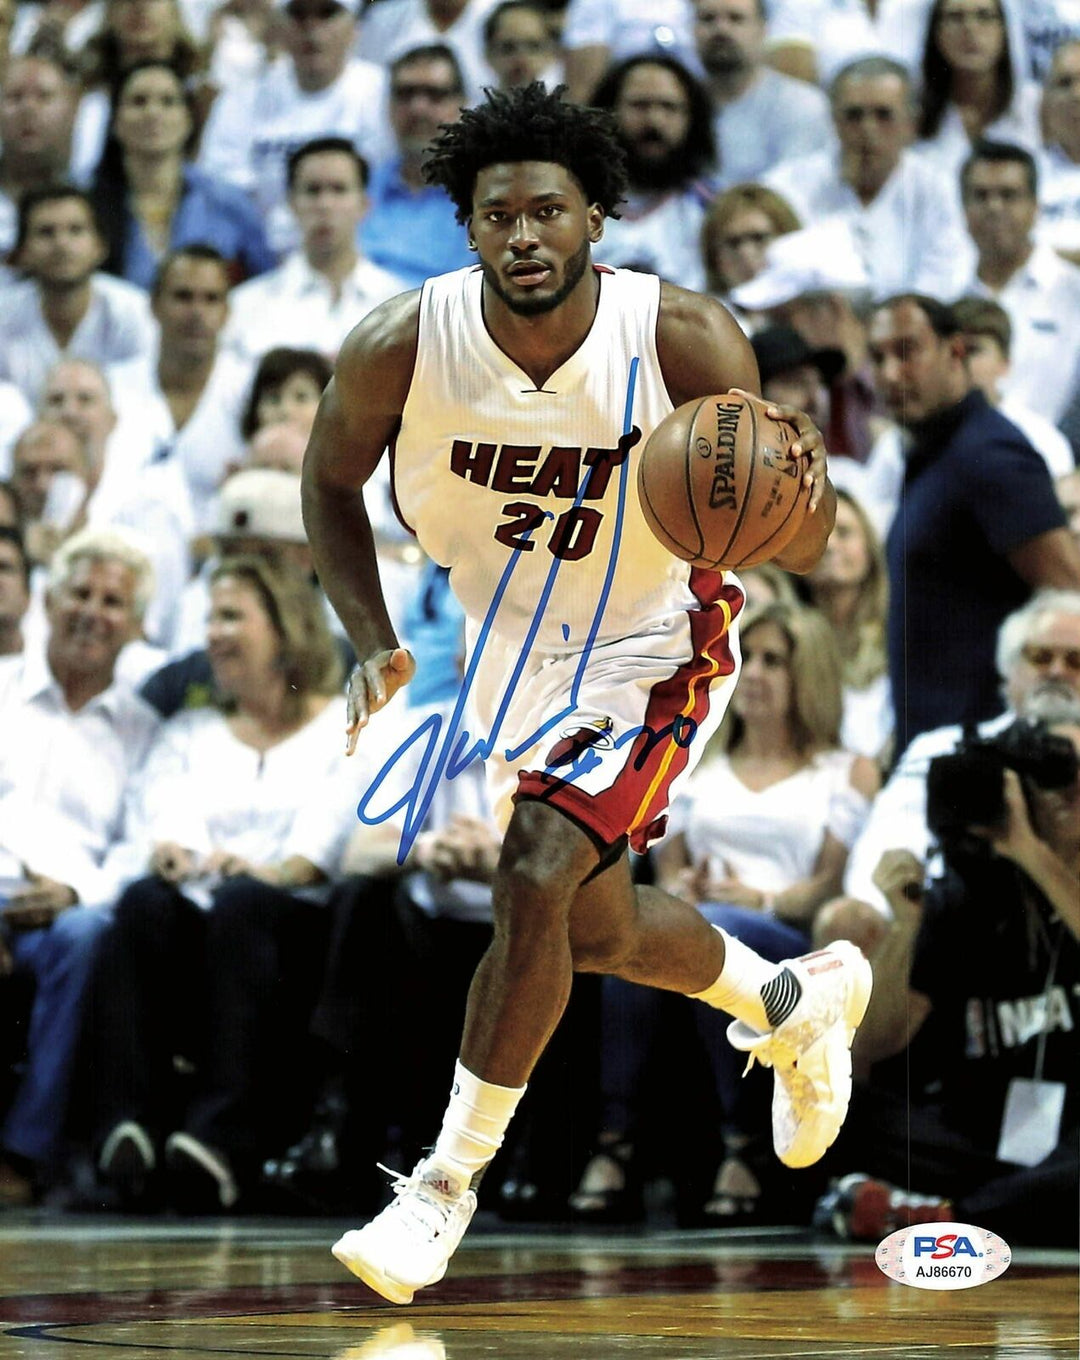 JUSTISE WINSLOW signed 8x10 photo PSA/DNA Miami Heat Autographed Image 1